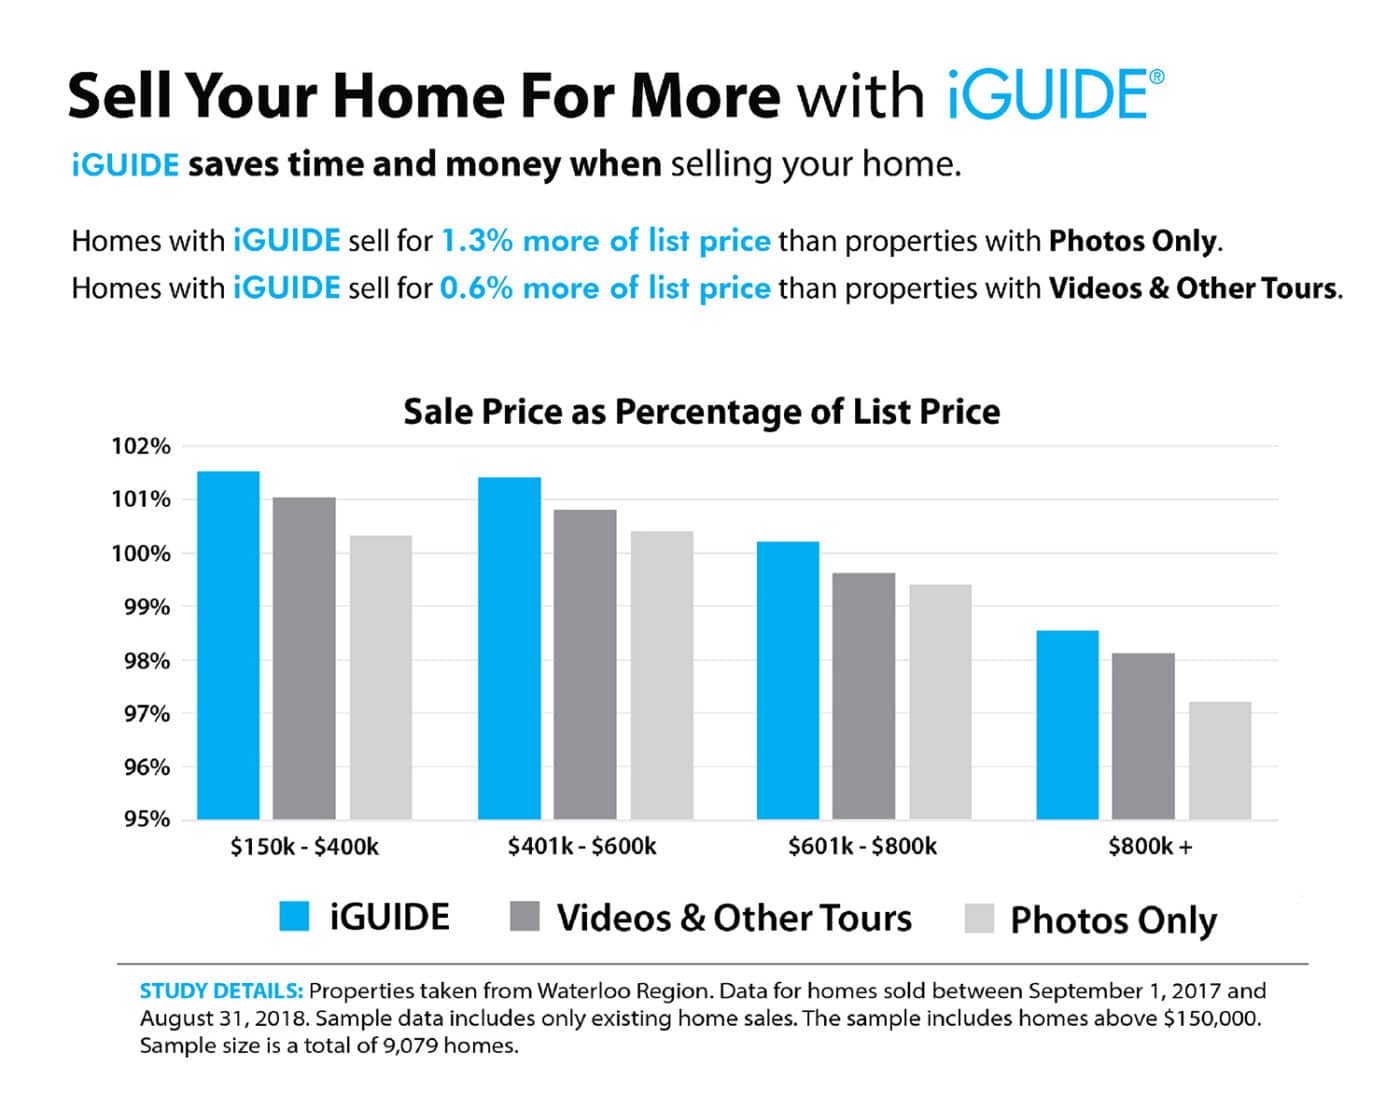 image graph - iguide sell your home for more